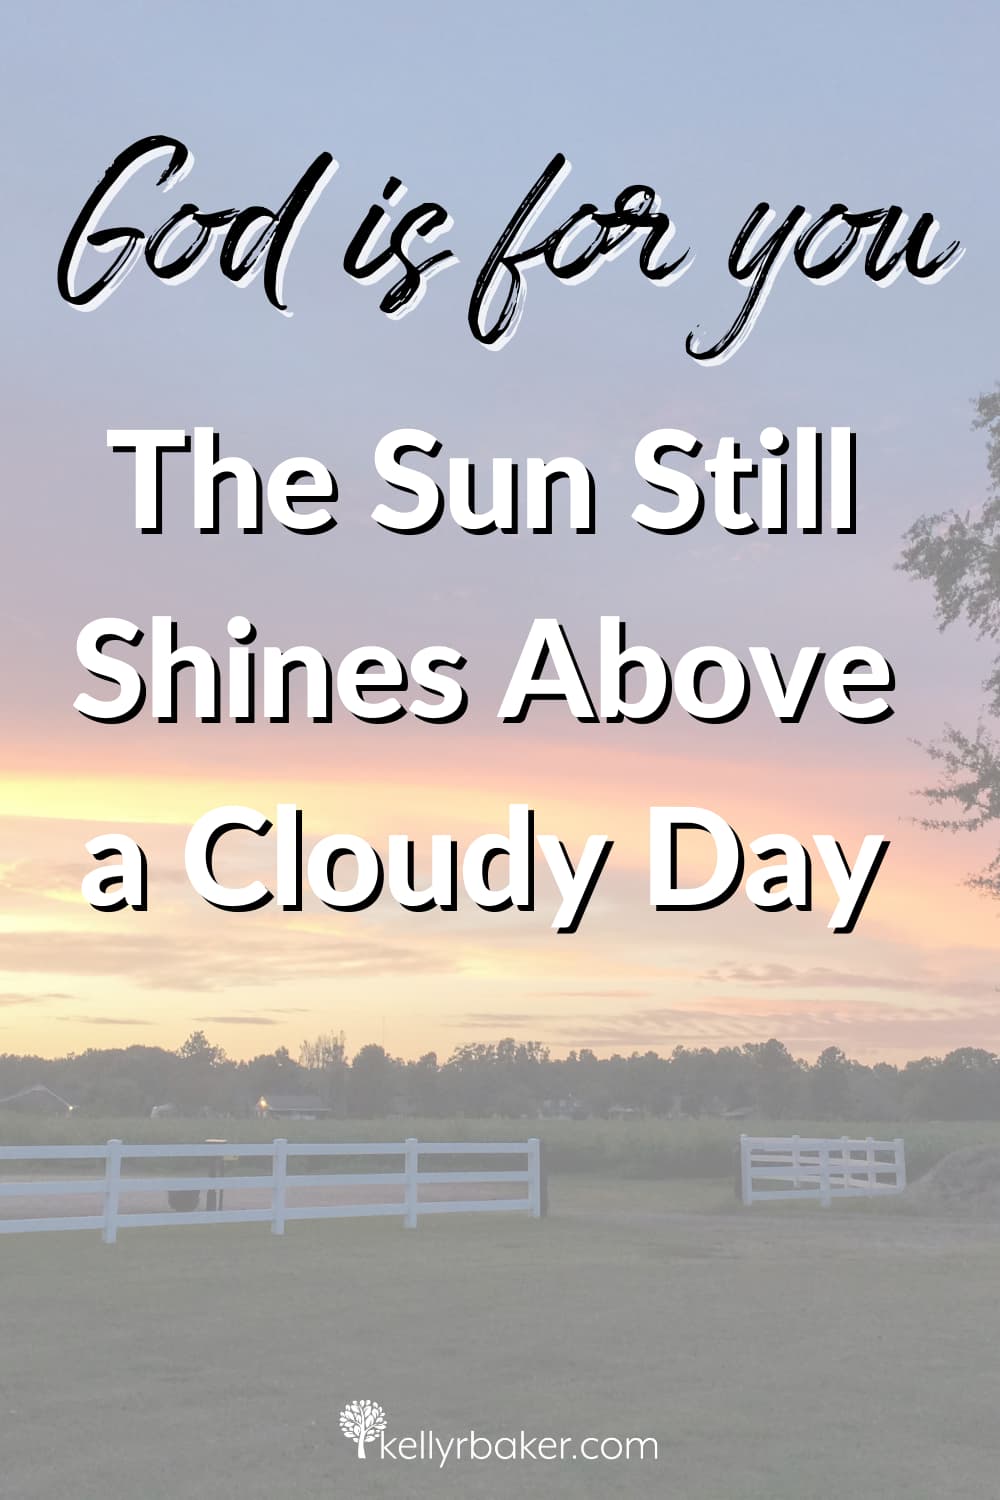 God is For You: The Sun Still Shines Above a Cloudy Day